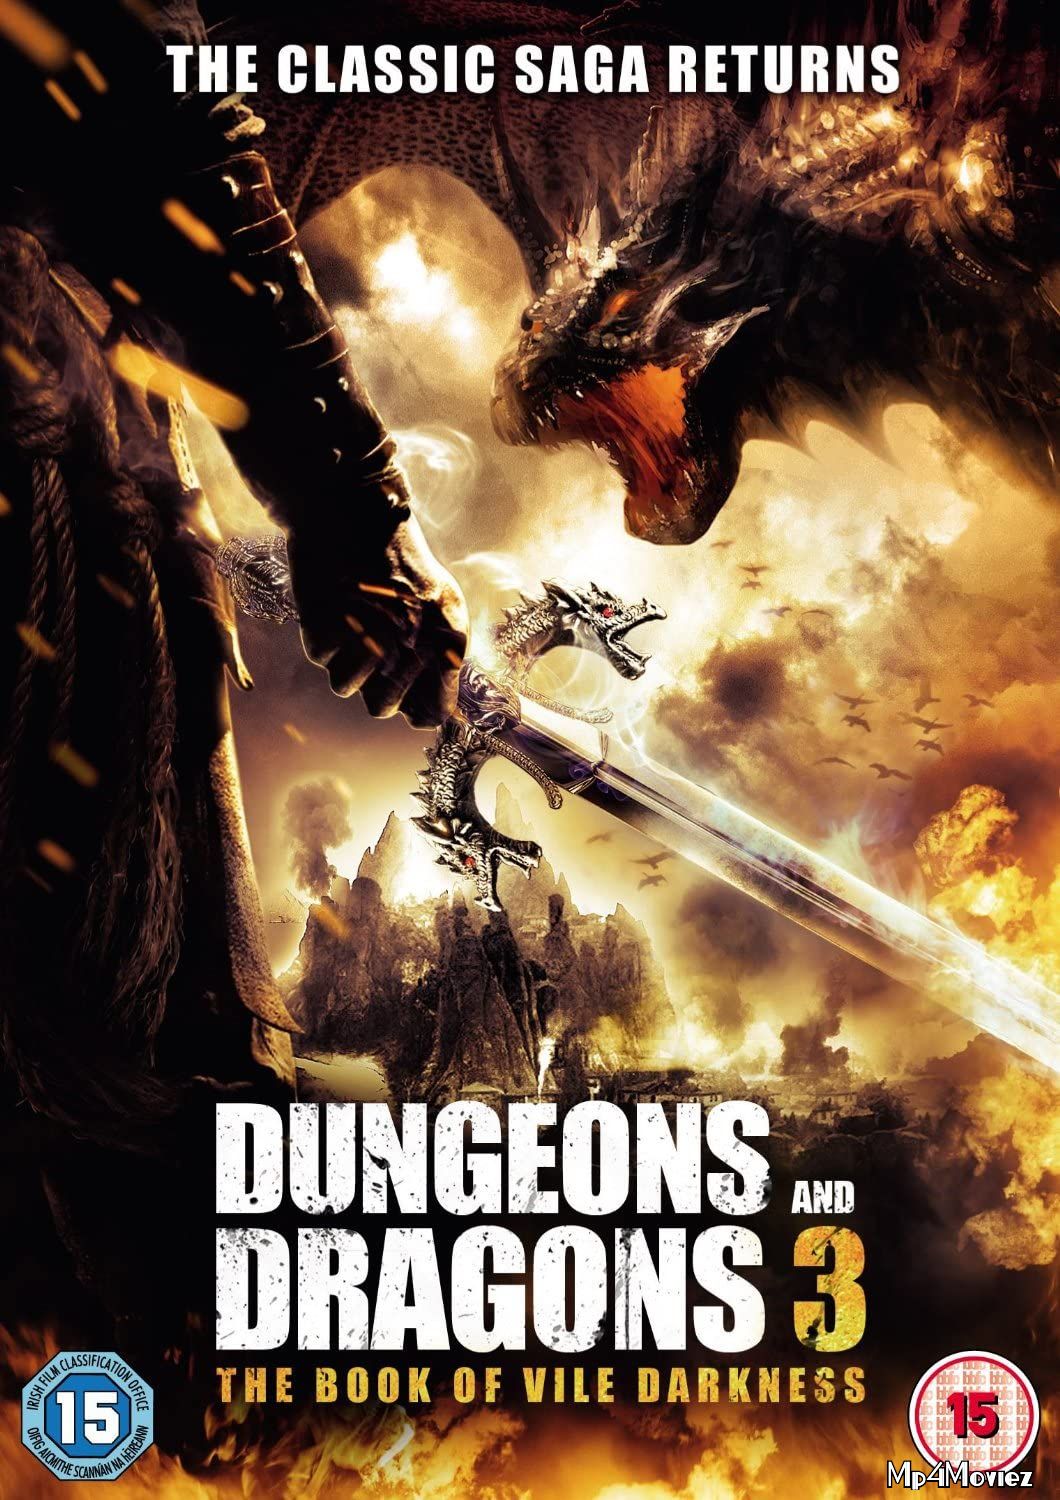 Dungeons And Dragons The Book of Vile Darkness 2012 Hindi Dubbed Full Movie download full movie